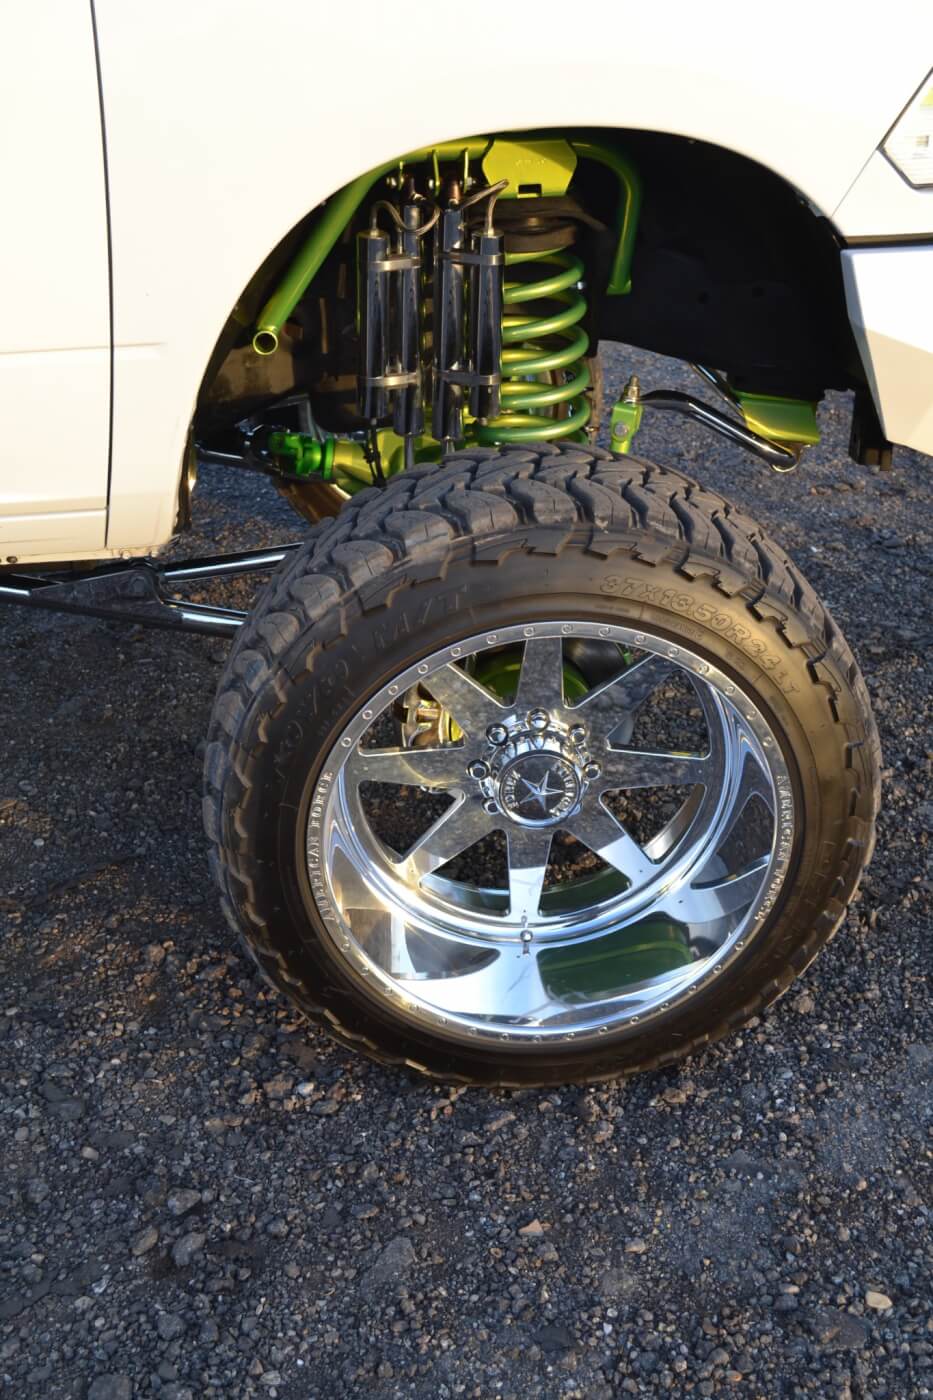 The right set of wheels can do a lot for a truck, so Joey was careful with his selection. In the end, a set of 24x12-inch Evade wheels got the nod for their killer looks.